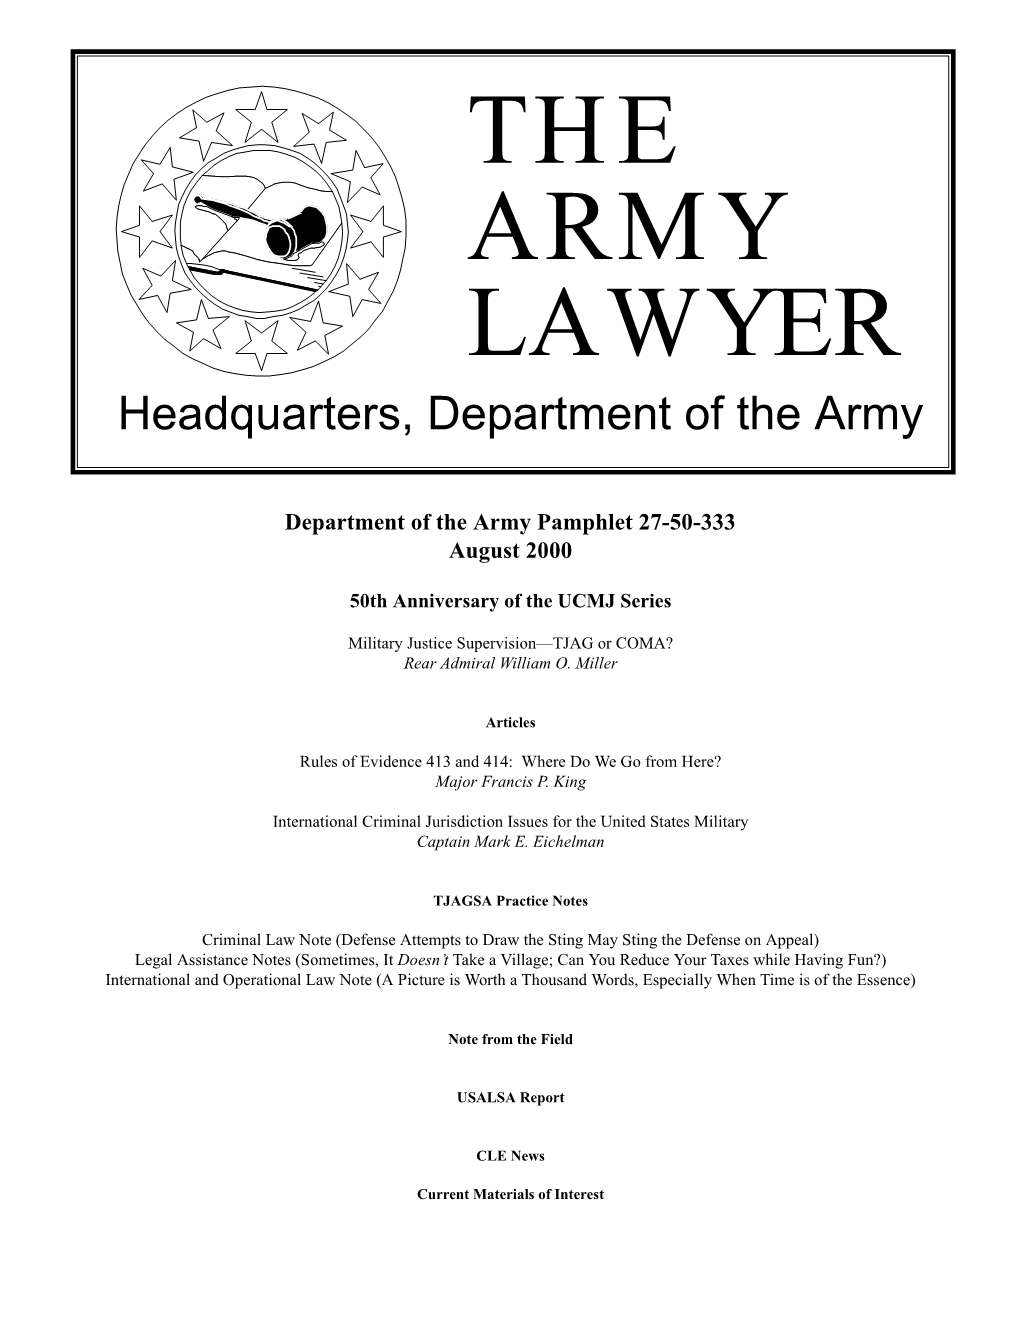 THE ARMY LAWYER Headquarters, Department of the Army